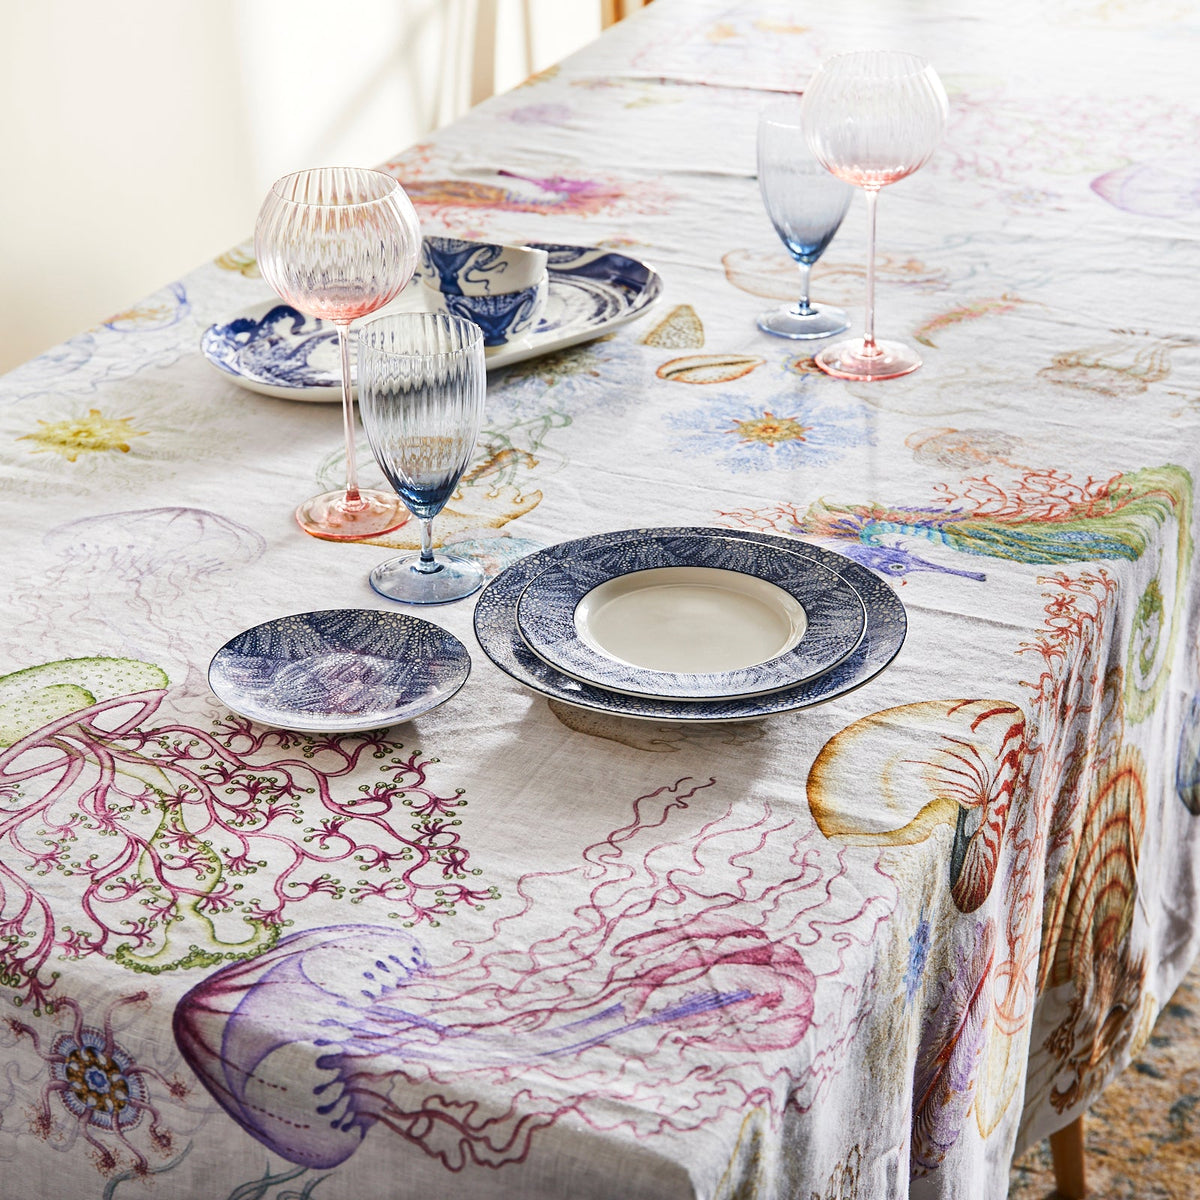 A table is set with a TTT Reef Hemp Tablecloth, a playful and colorful tablecloth.